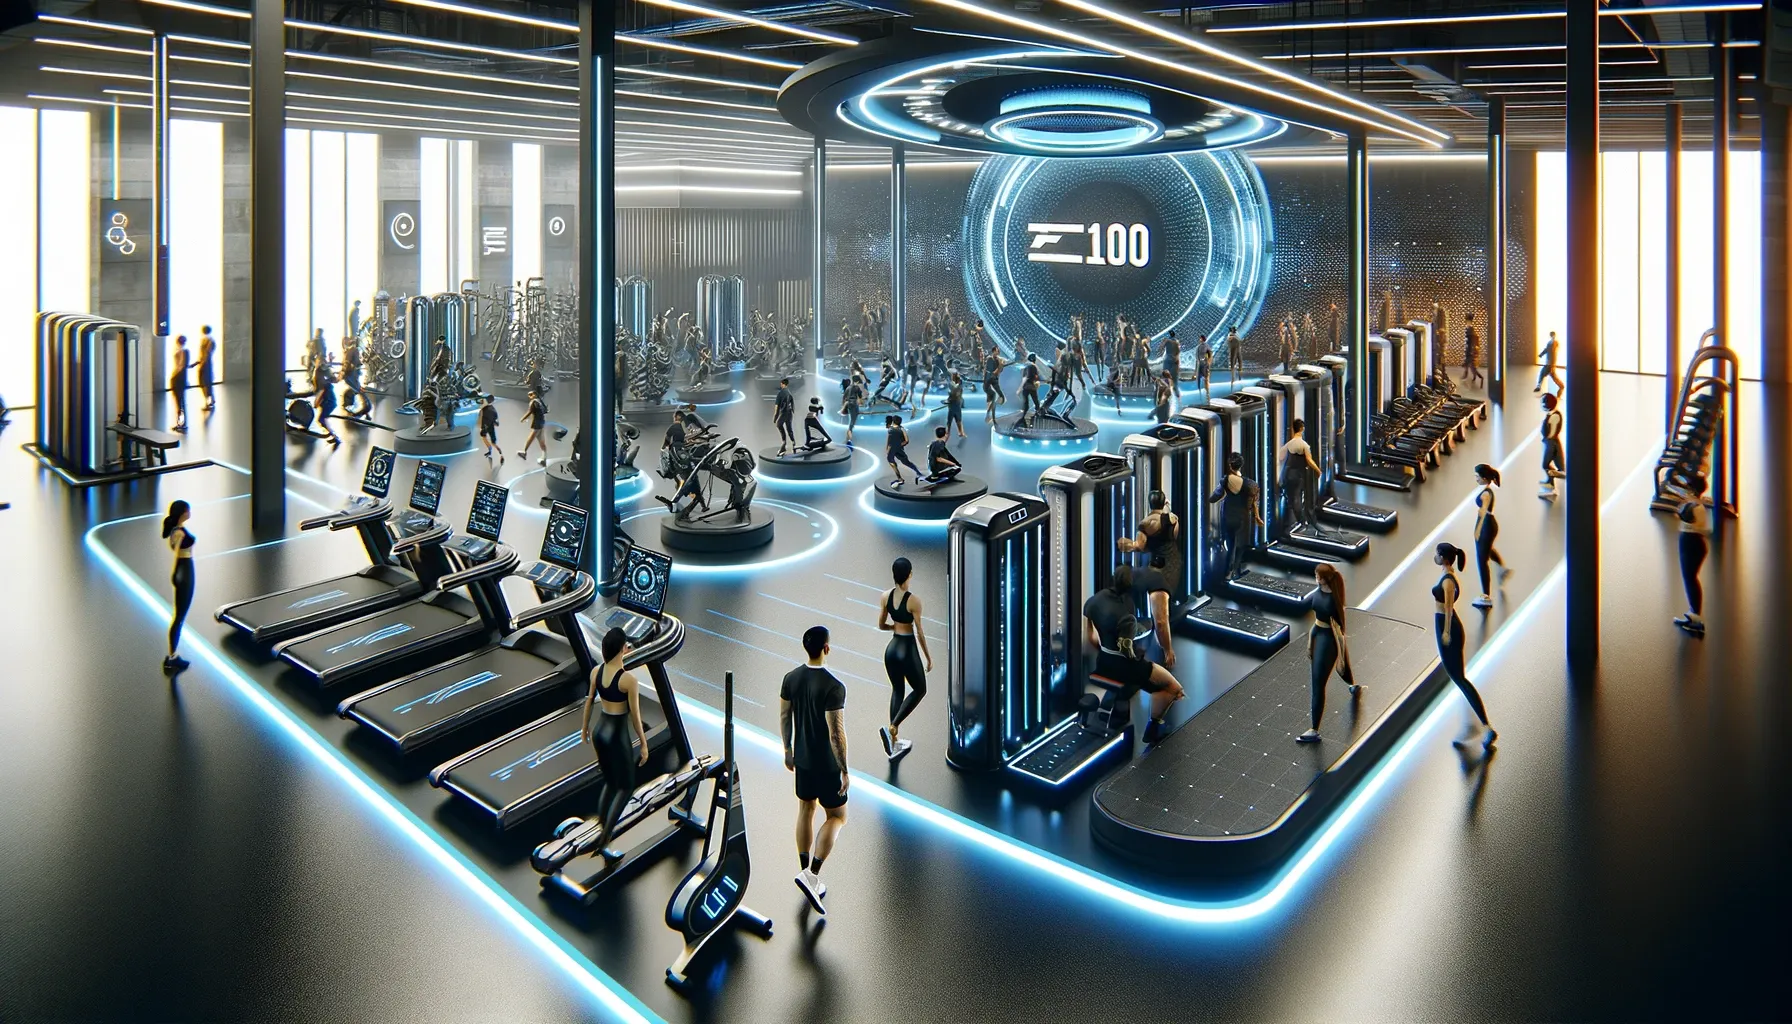 ZTEC100 Tech Fitness: The Future of Fitness is Here